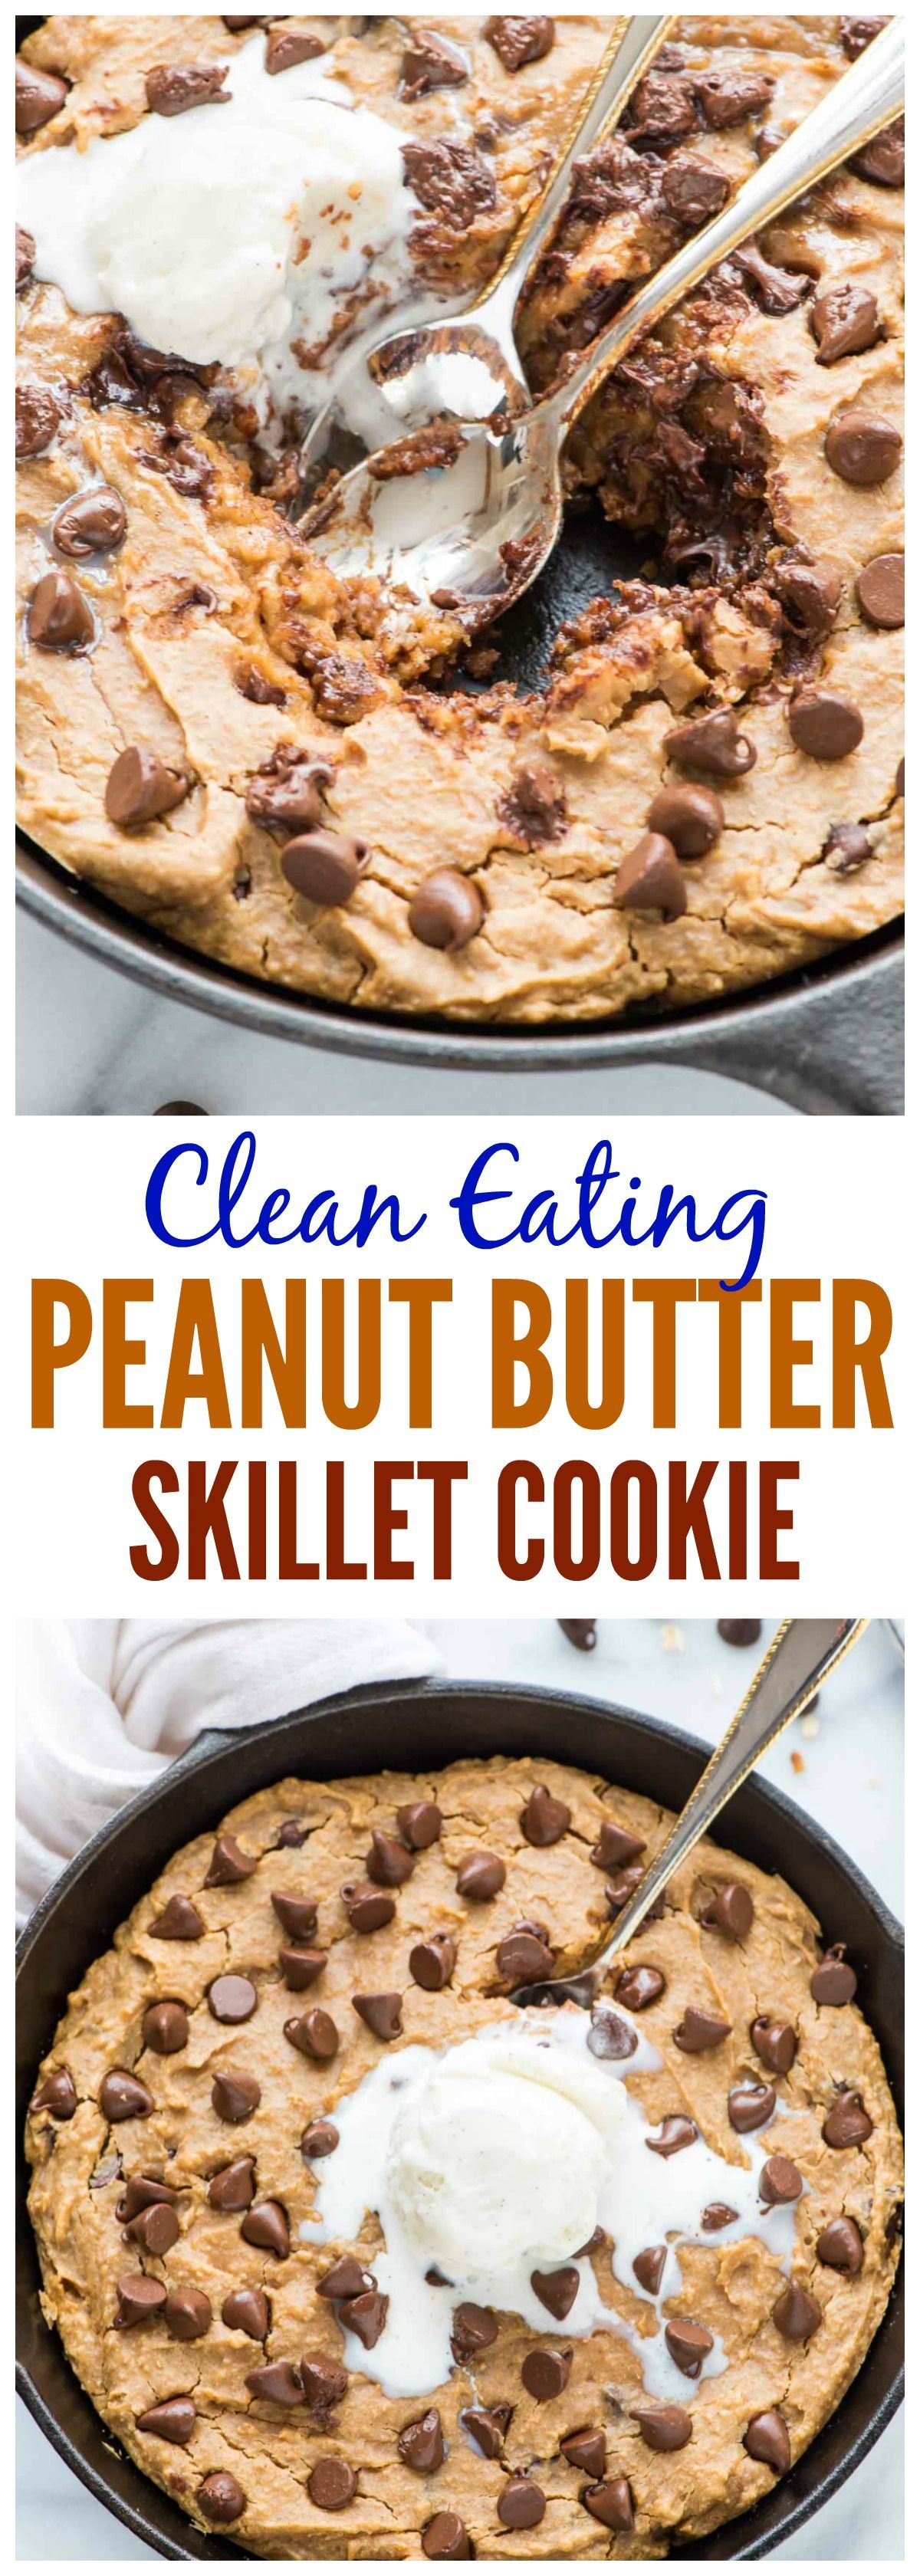 Clean Eating Peanut Butter Skillet Cookie. NO butter, sugar, or oil, and it tastes incredible. This is the BEST healthy peanut